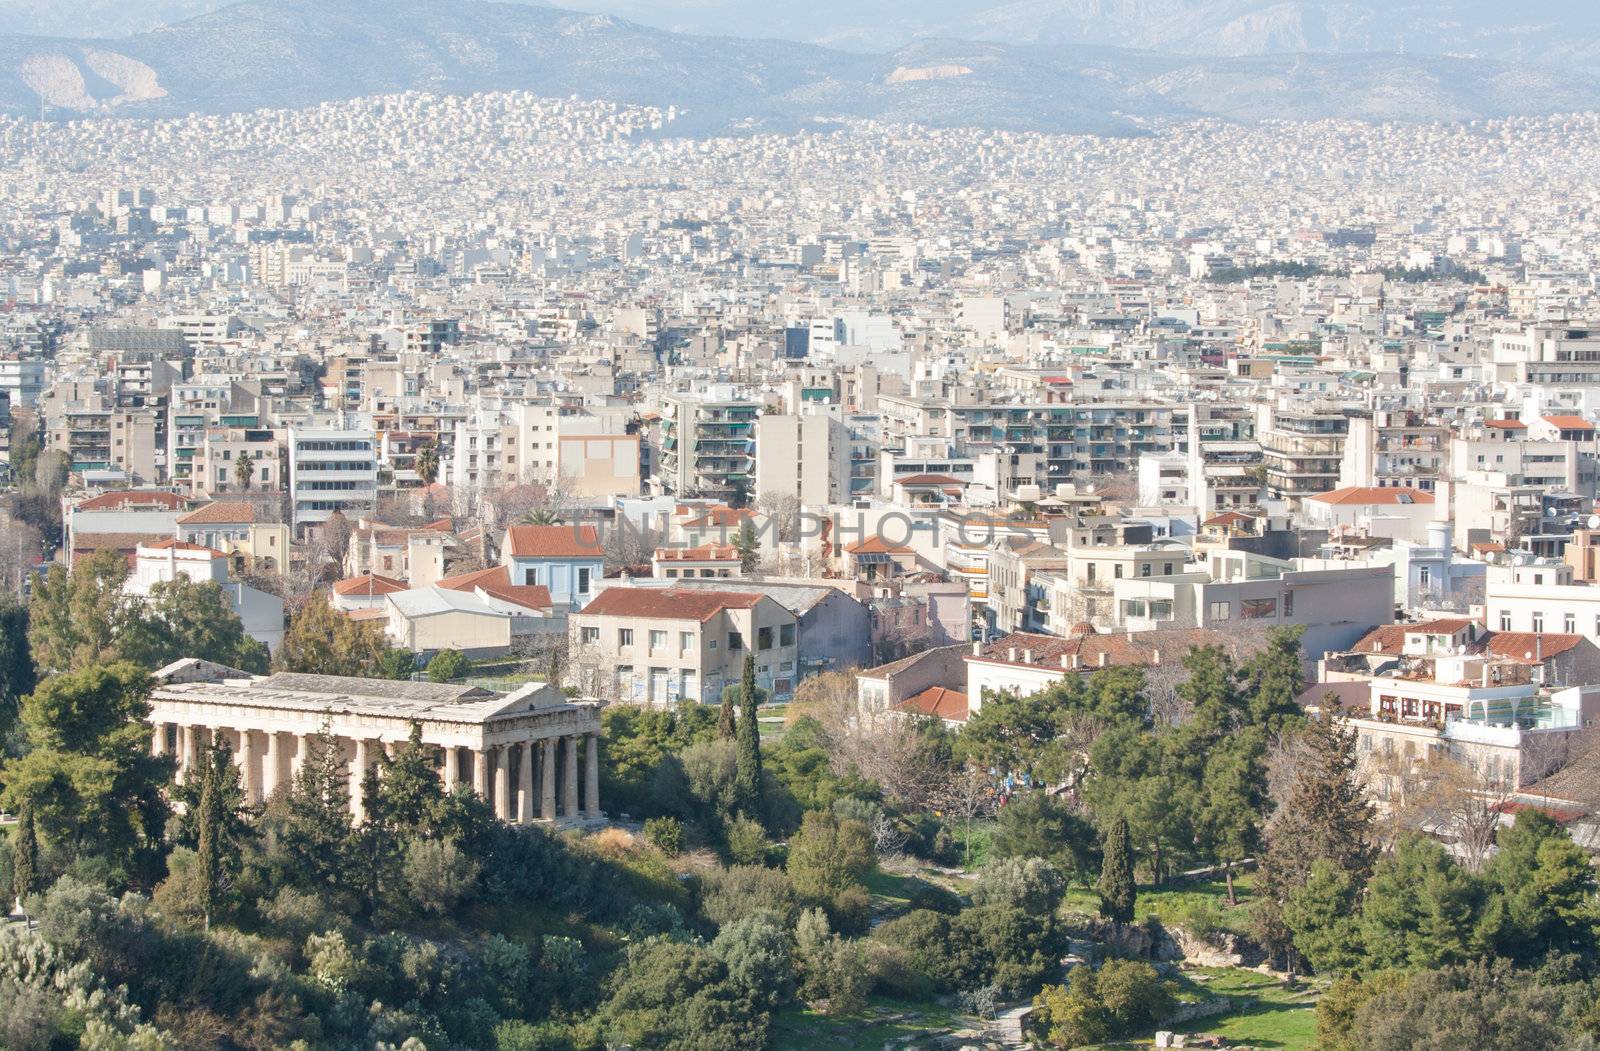 View of the city of Athens as seen from Areopagus or Mars Hill with the temple of Hephaistos (also known as Thissio or Theseion) on the foreground and mountains on the background, Greece.